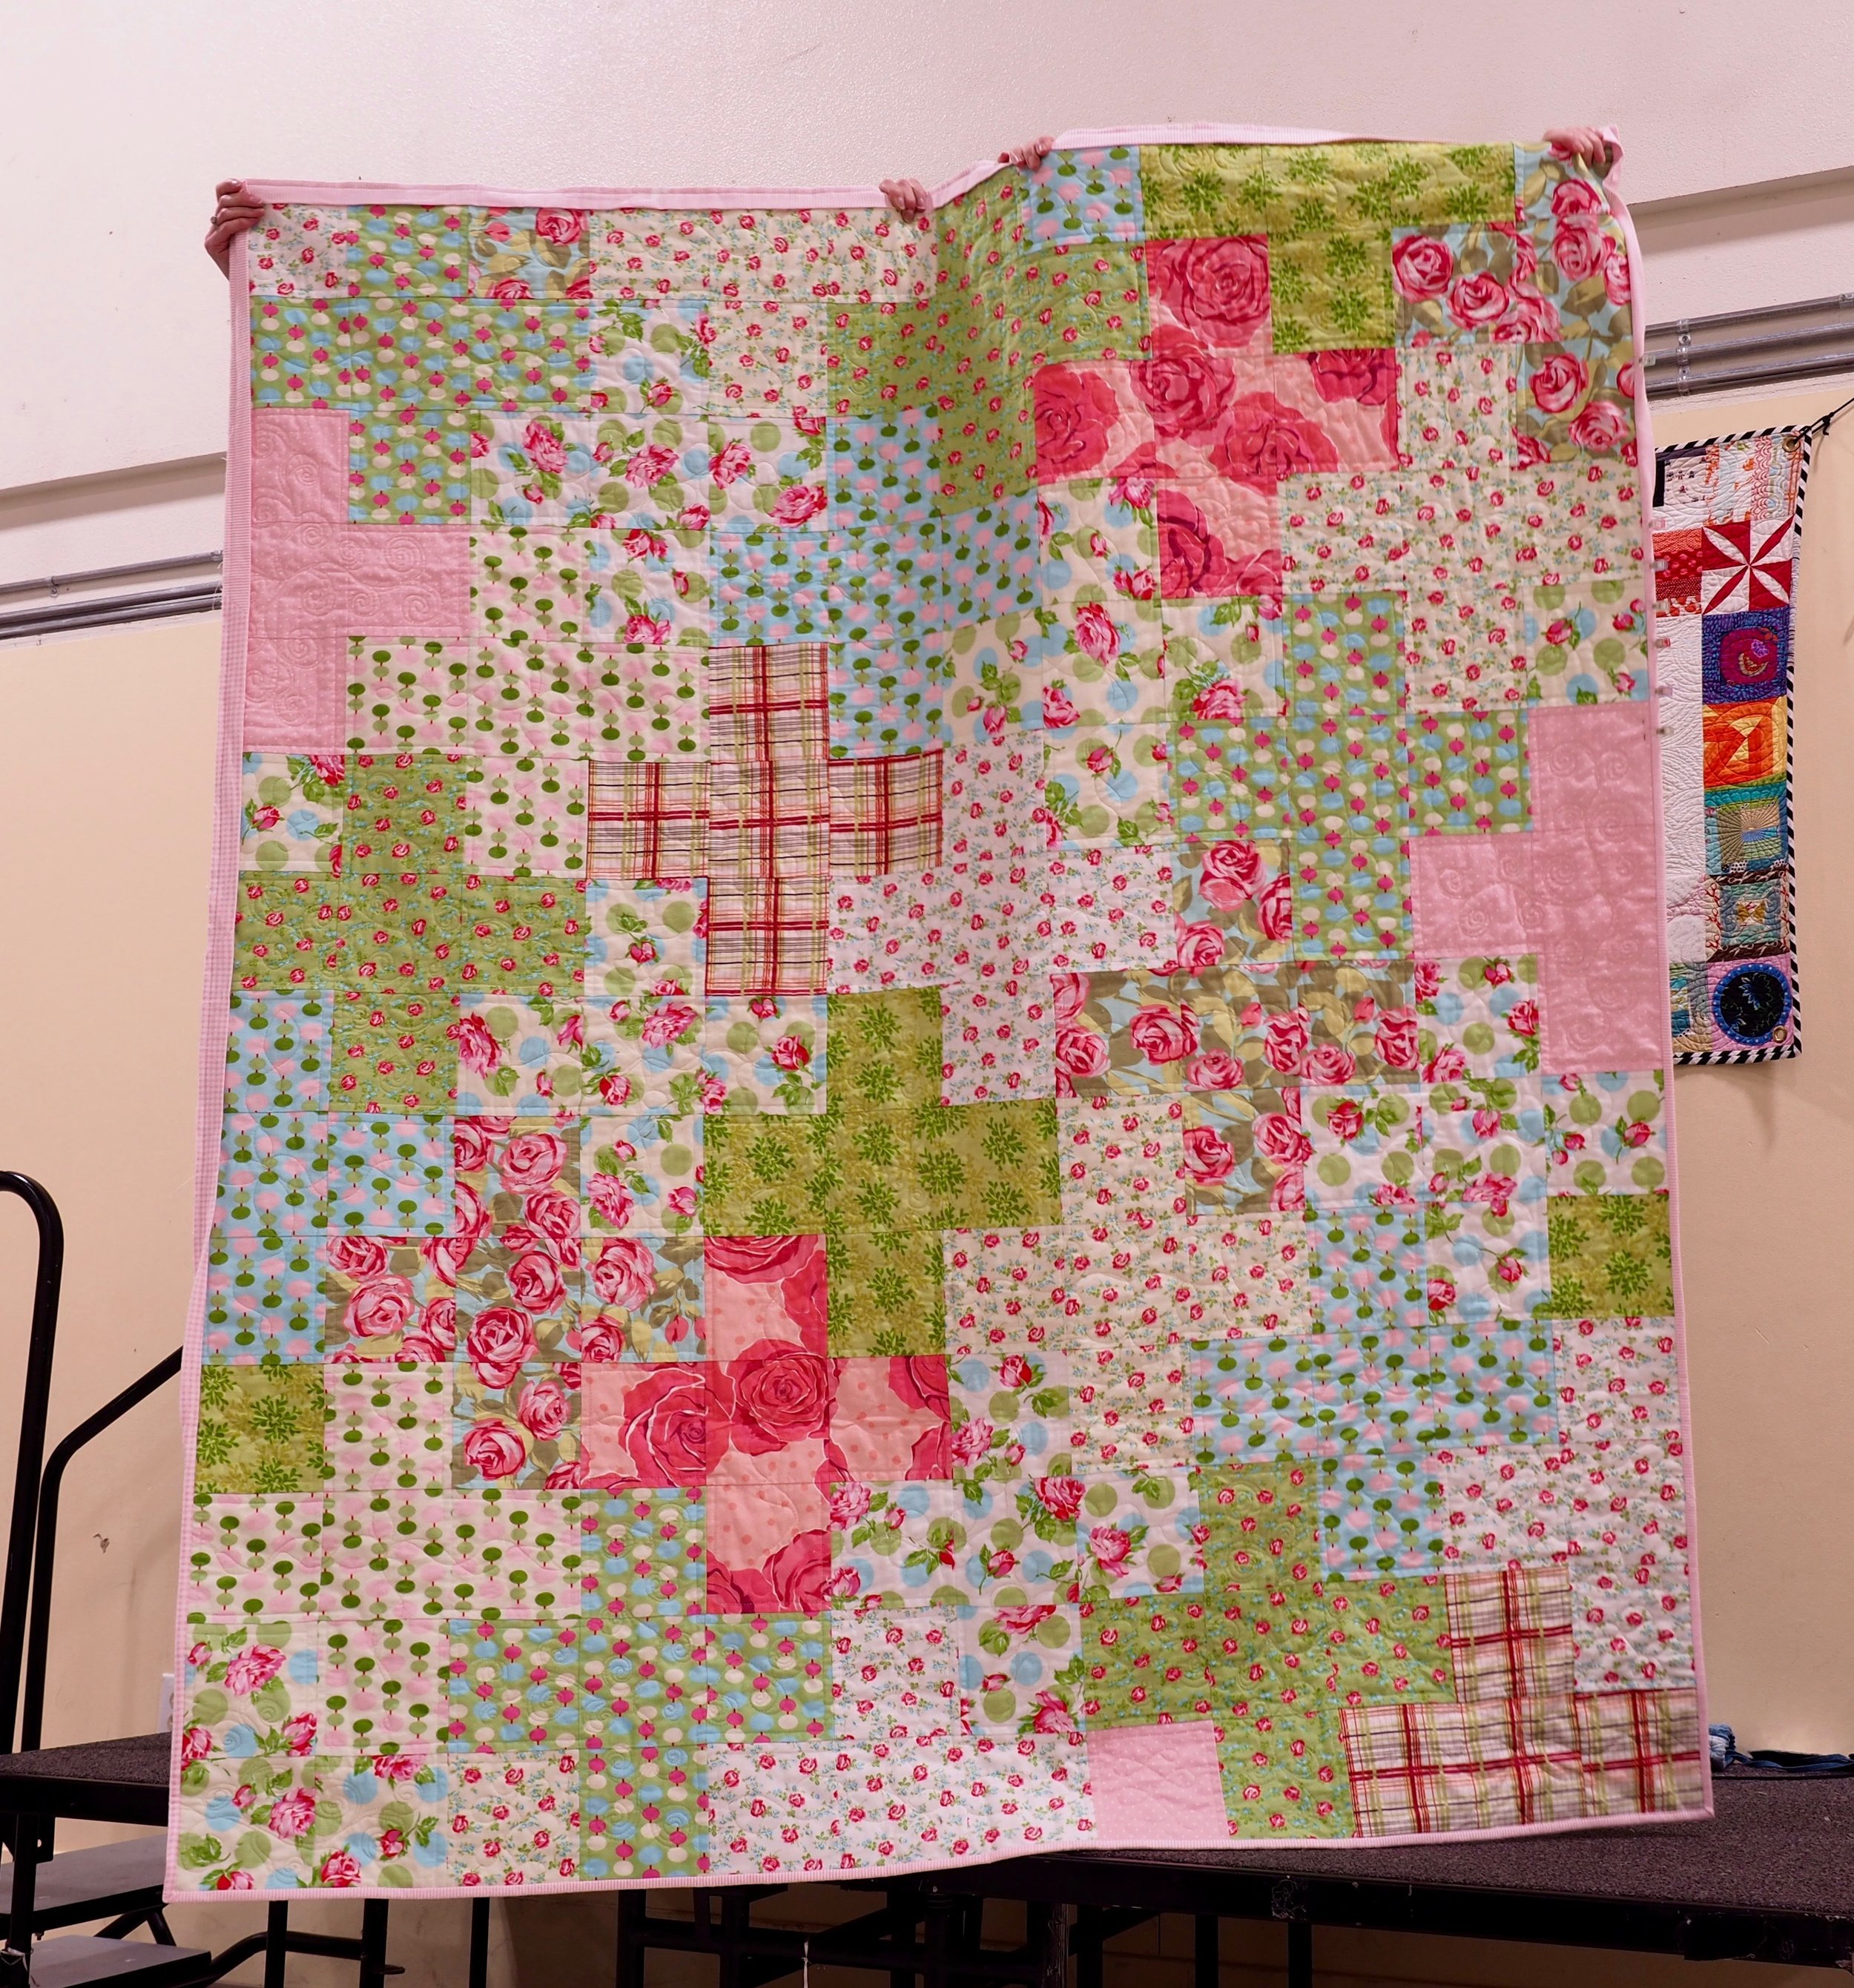 Flannel "plus" Quilt by Lara Giles